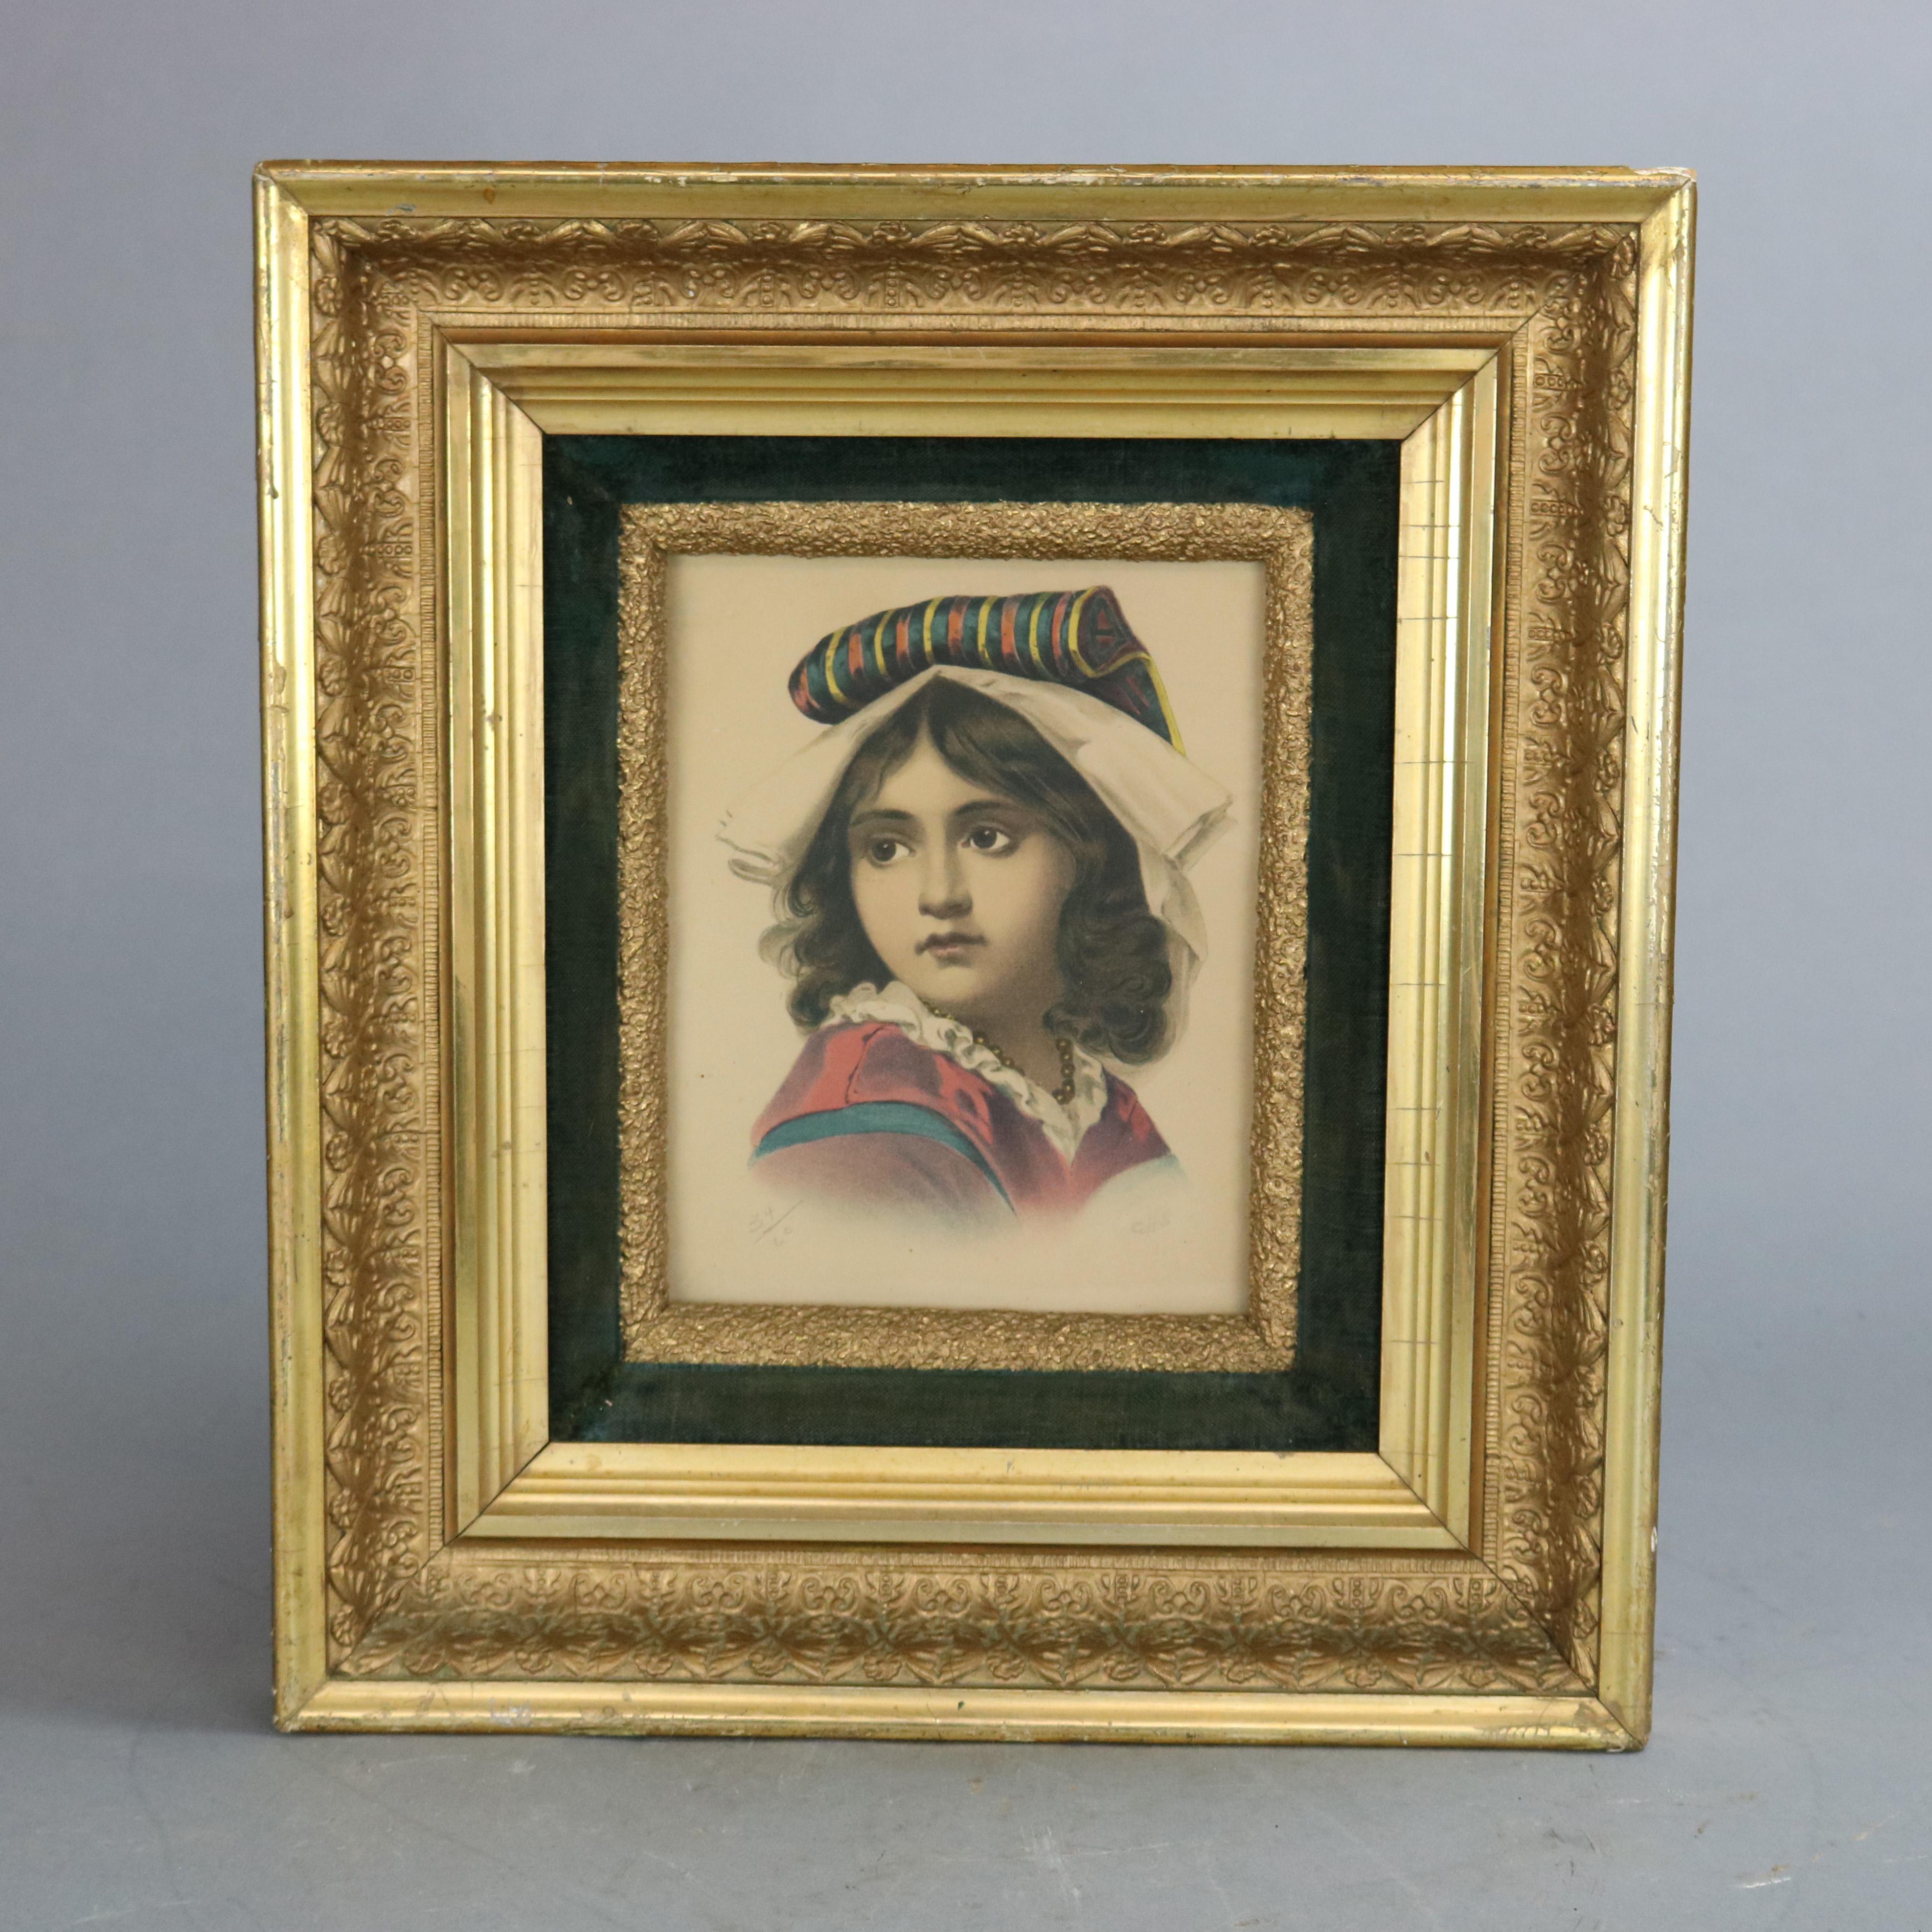 An antique matching set of deep set first finish giltwood frames having foliate decoration and housing portrait prints of young children, signed and numbered, 19th century.

Measures: 17